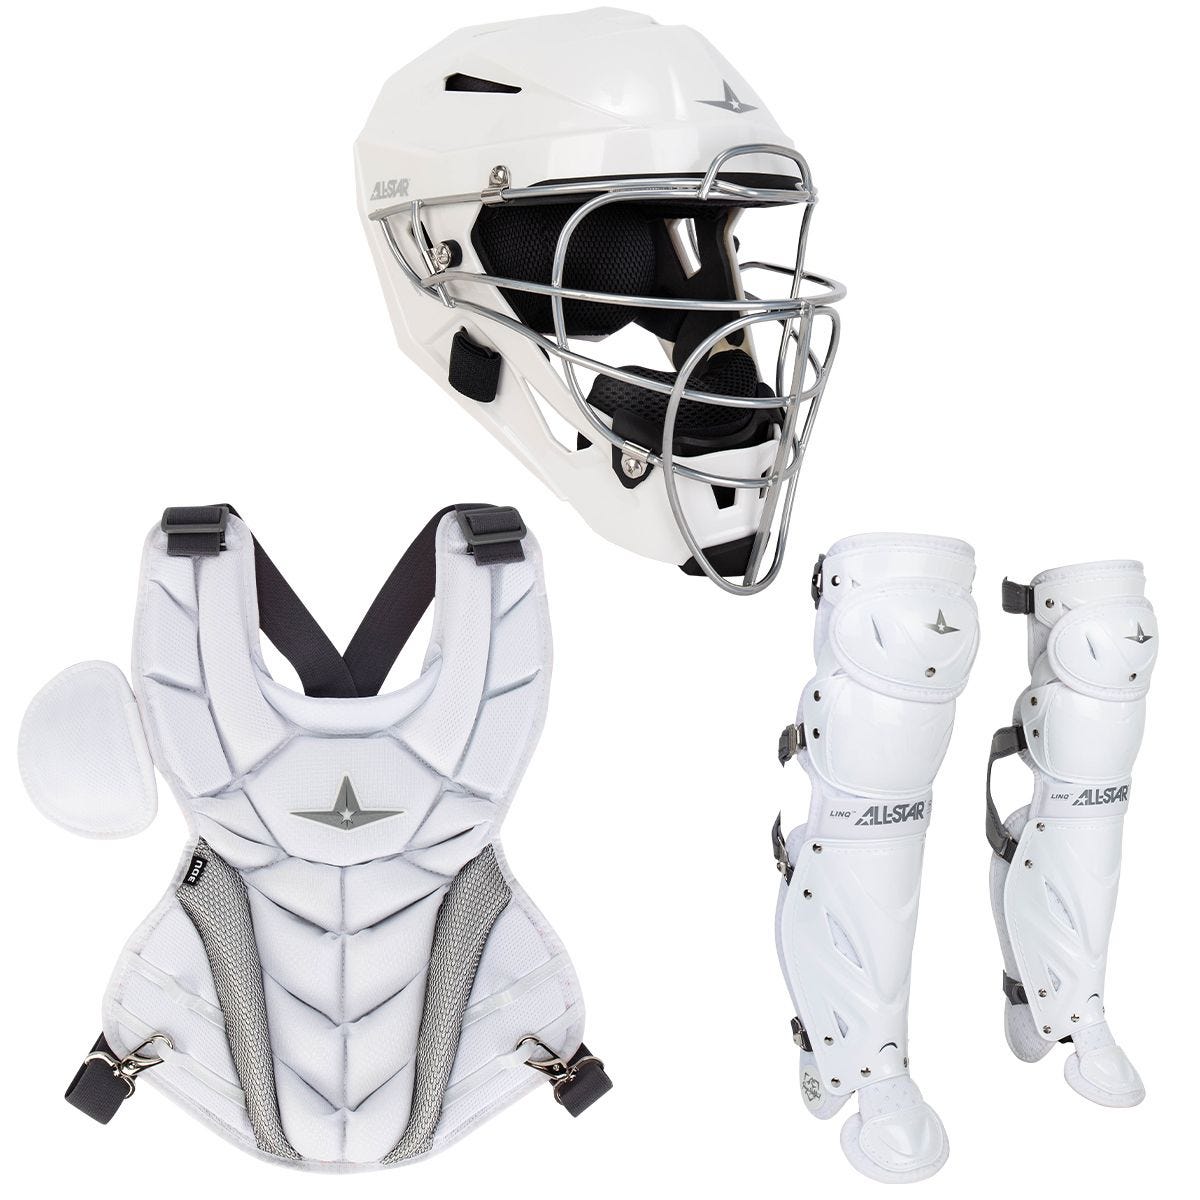 All-Star PHX Official Paige Halstead Fastpitch Softball Catcher's Kit